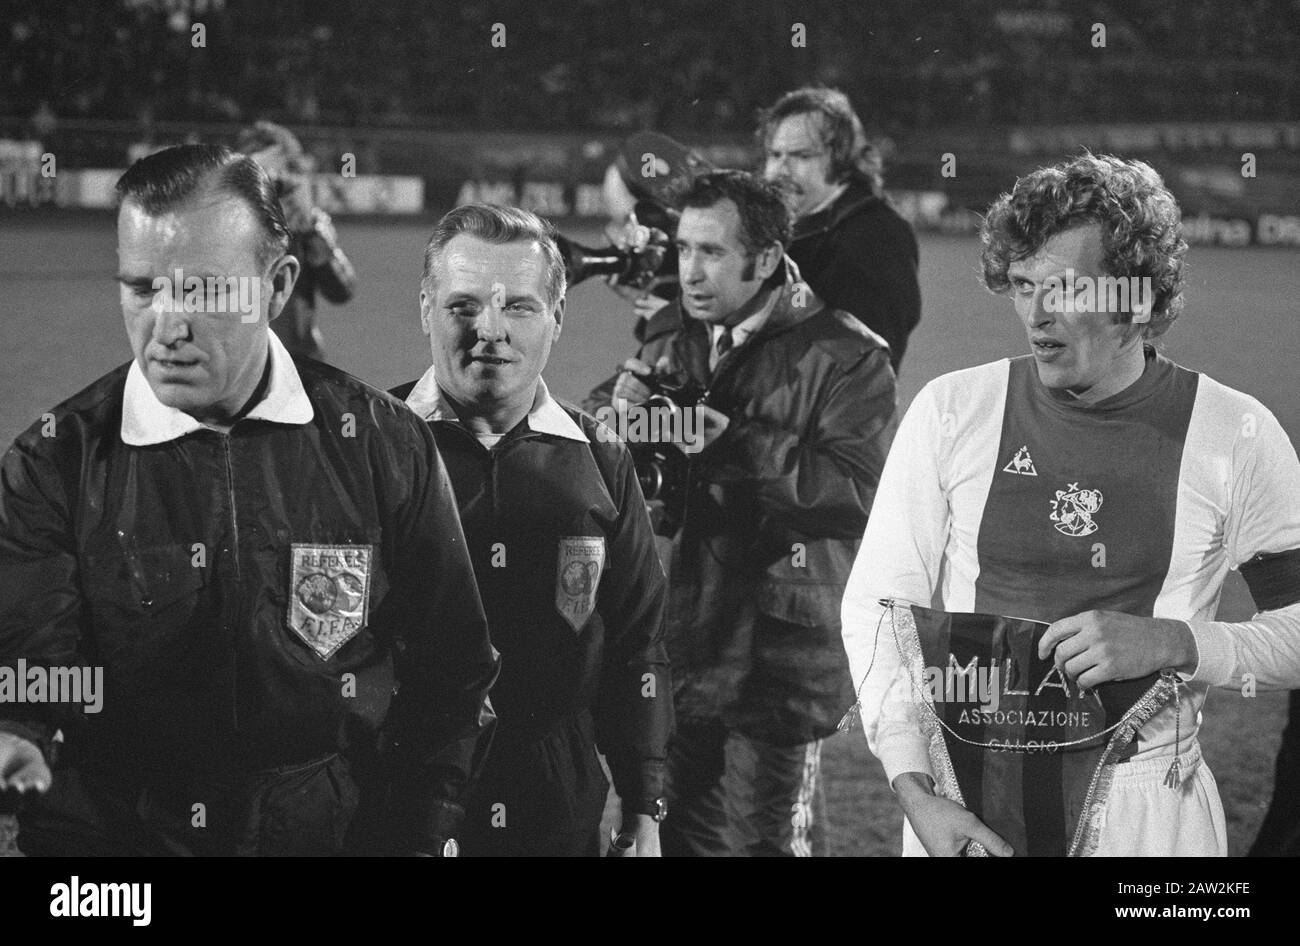 Ajax Against Ac Milan As Part Of The Super European Cup 6 0 Piet Keizer With Club Pennant Ac Milan Beside Him Arbitrators And Photographers Date January 16 1974 Location Amsterdam Noord Holland Keywords